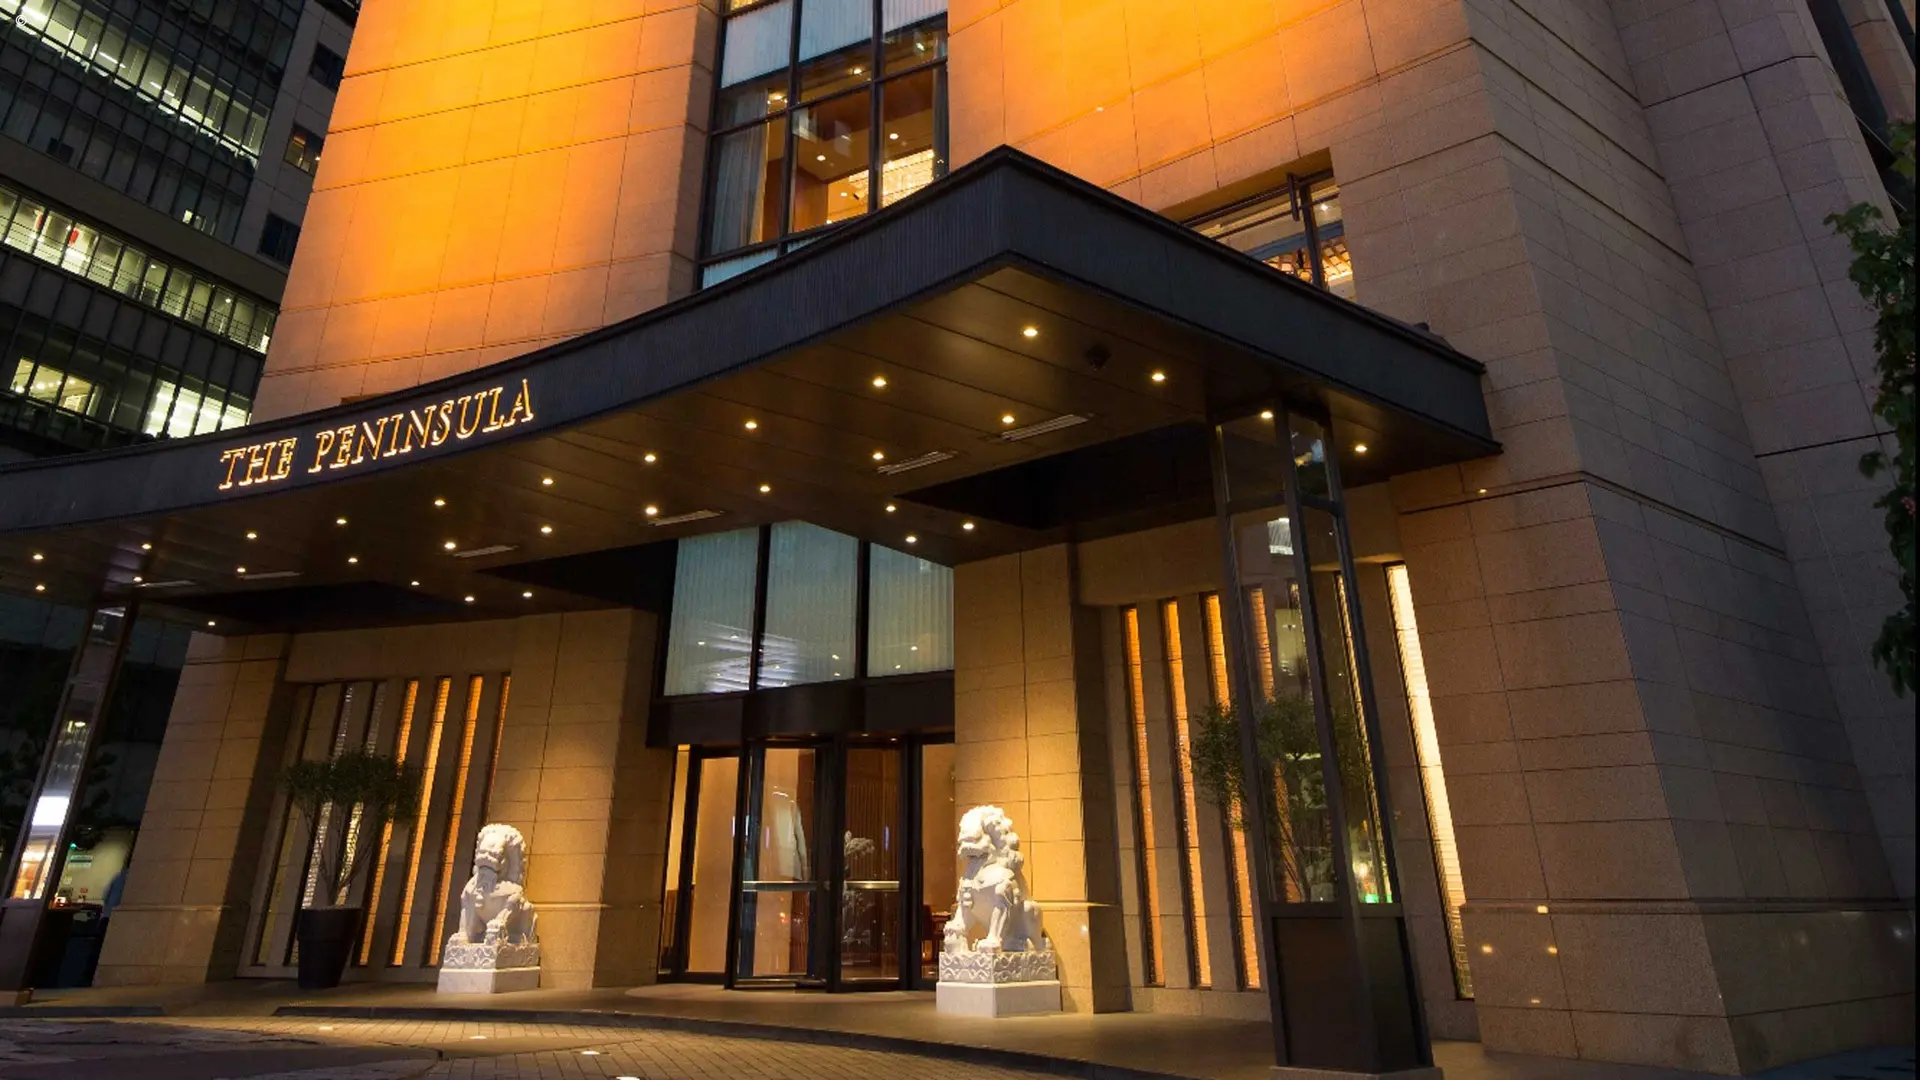 Outside view of the Peninsuala, Tokyo with two lion statues in entrance and modern outside decor.